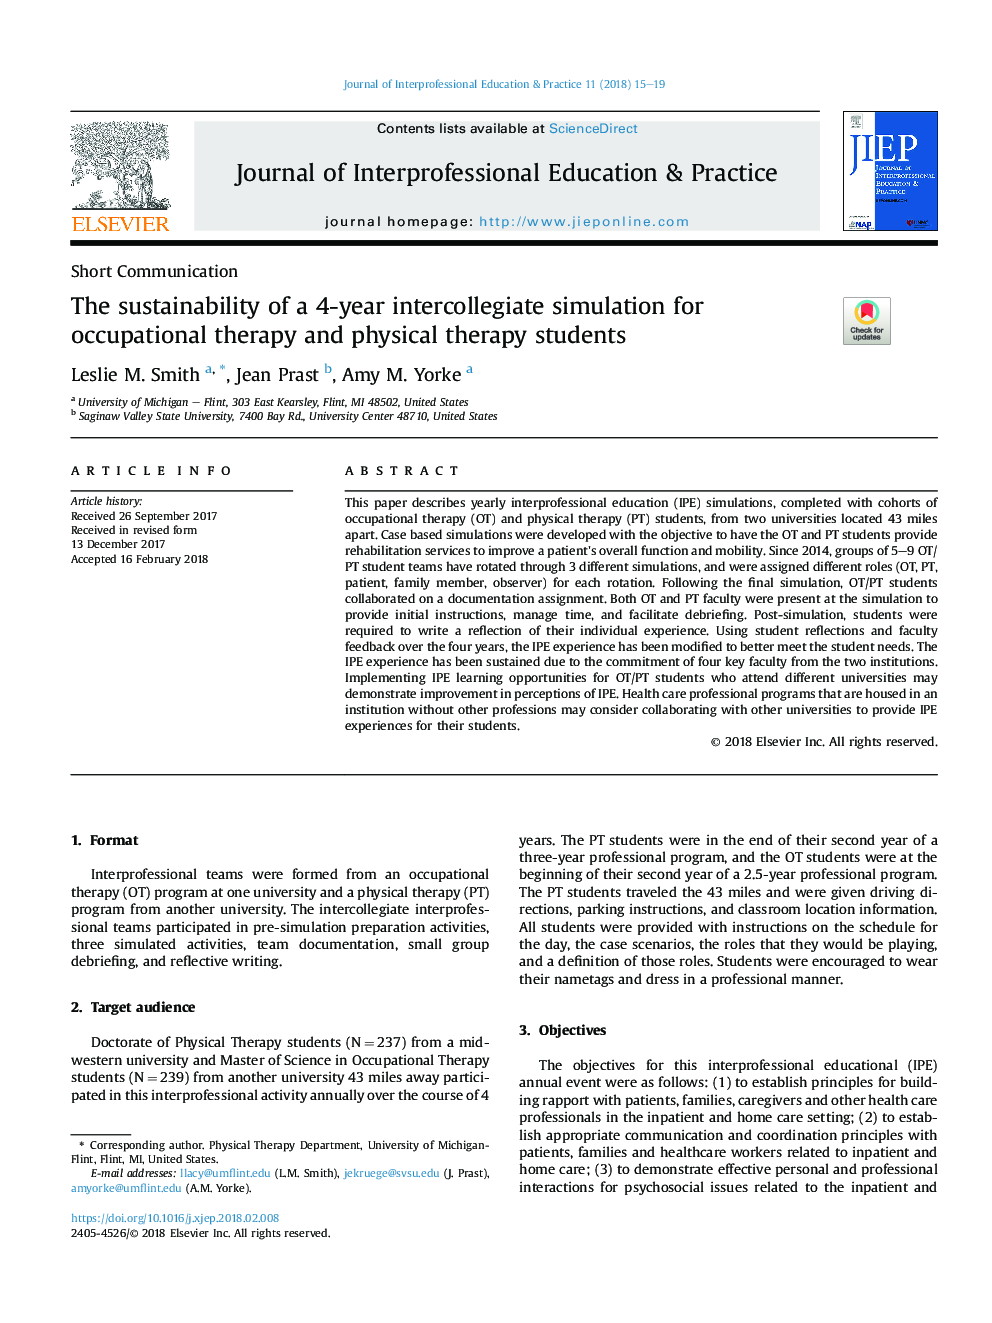 The sustainability of a 4-year intercollegiate simulation for occupational therapy and physical therapy students